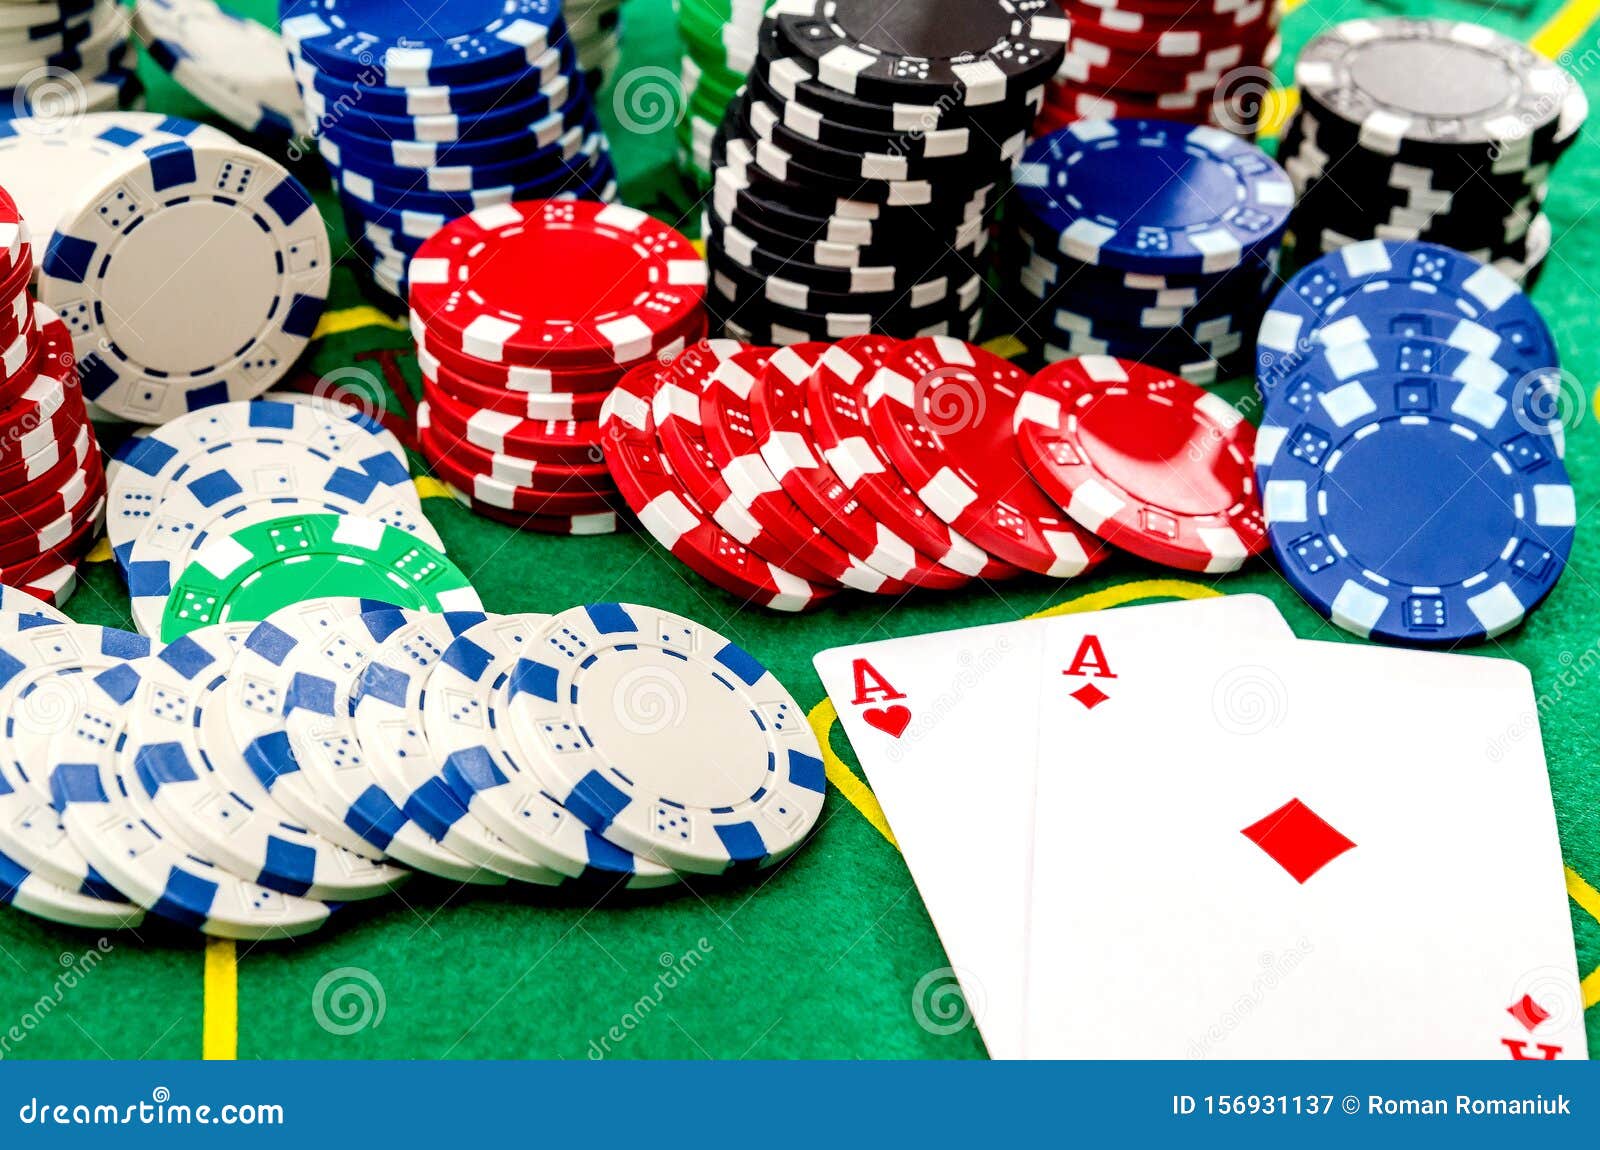 A Pair Of Aces Chips - Poker Game Stock Image - Image of ...